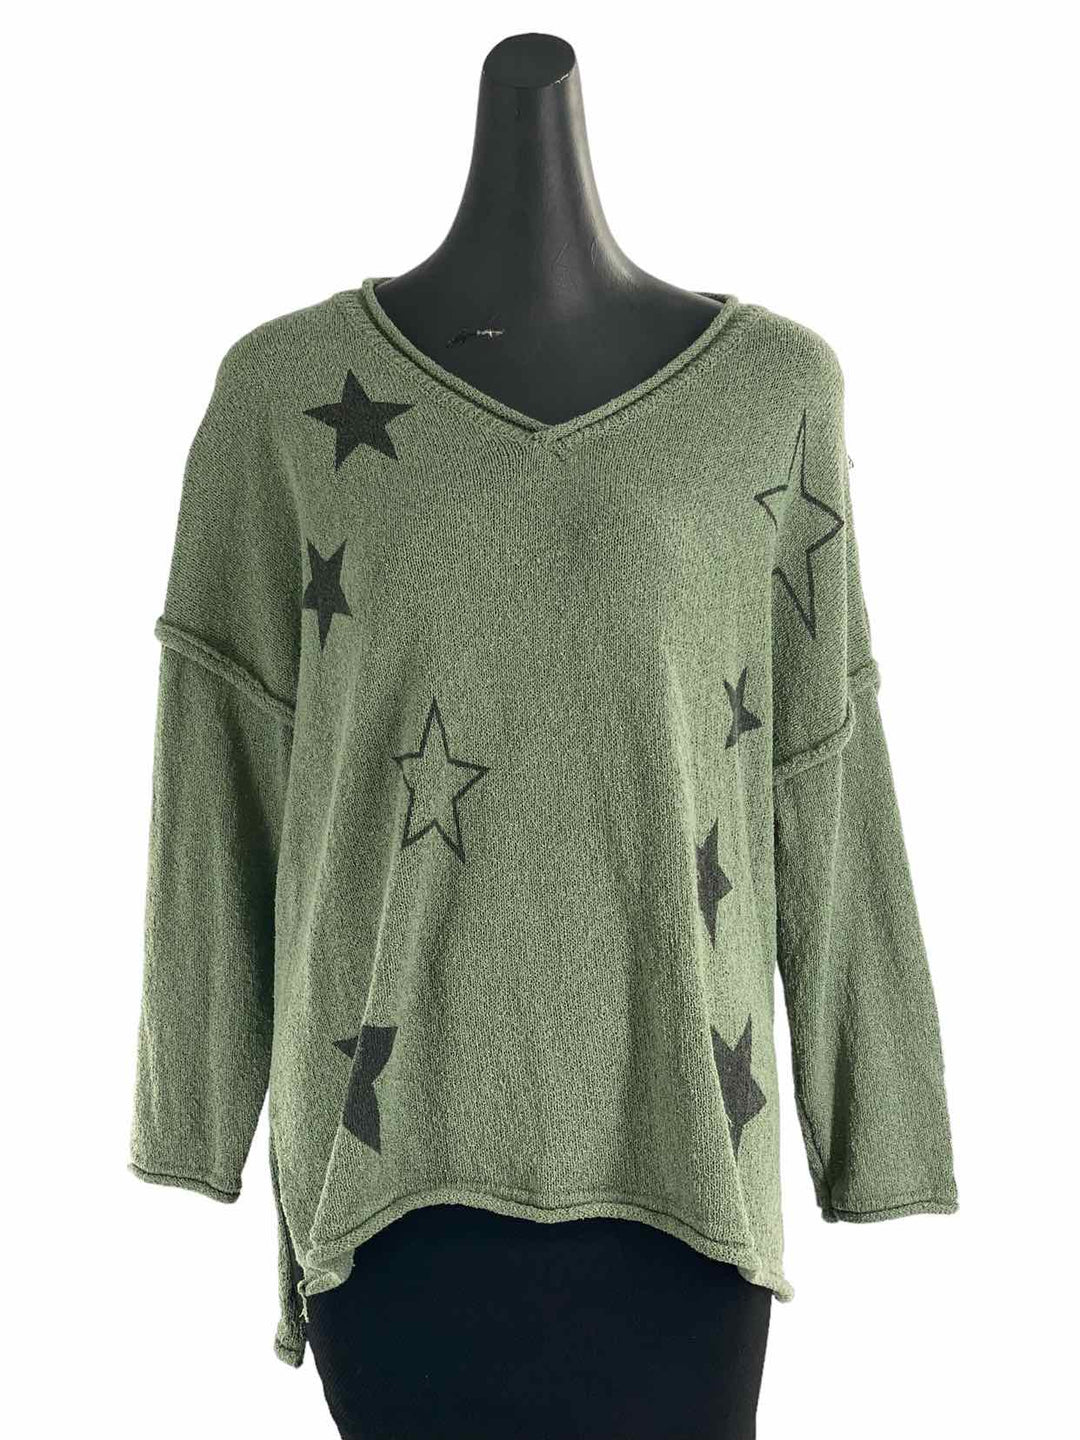 Easel Size S Green STARS Sweater